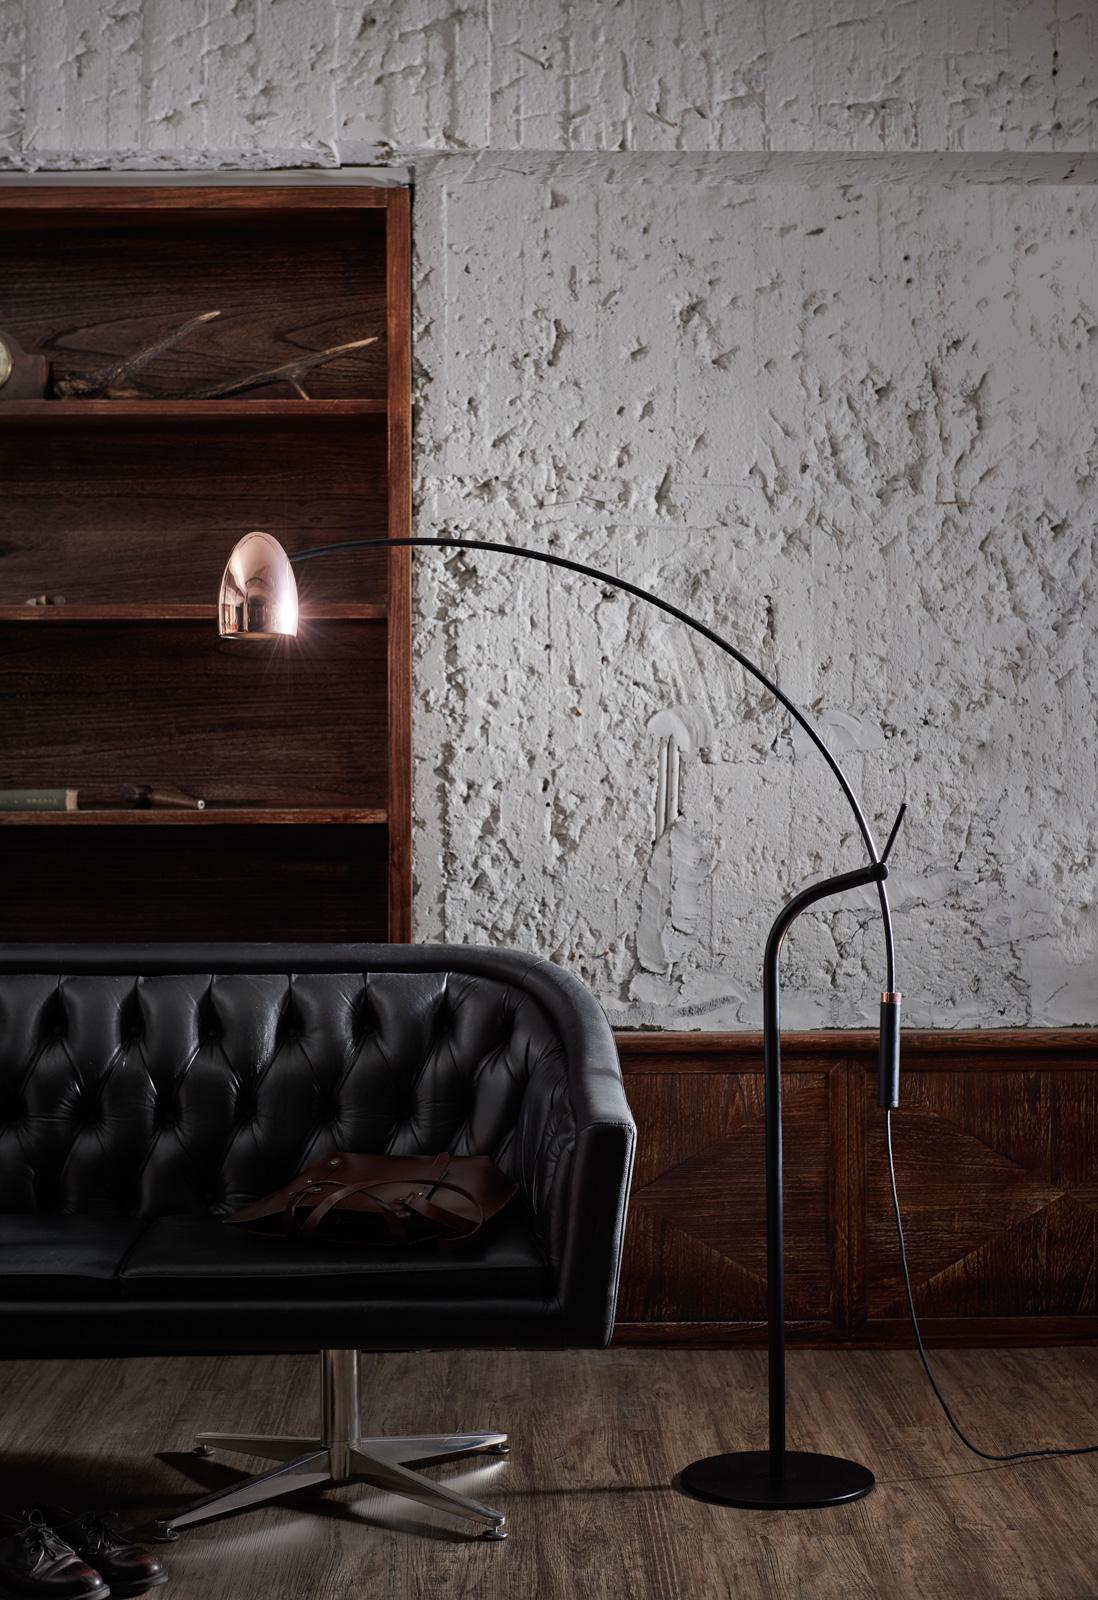 Featuring brilliant mechanical structures while maintaining the essential spirit of design, the Hercules provides a stunning balance between form and function. Users can turn on and dim the LED light via a swirling switch, adjust the rotating shade